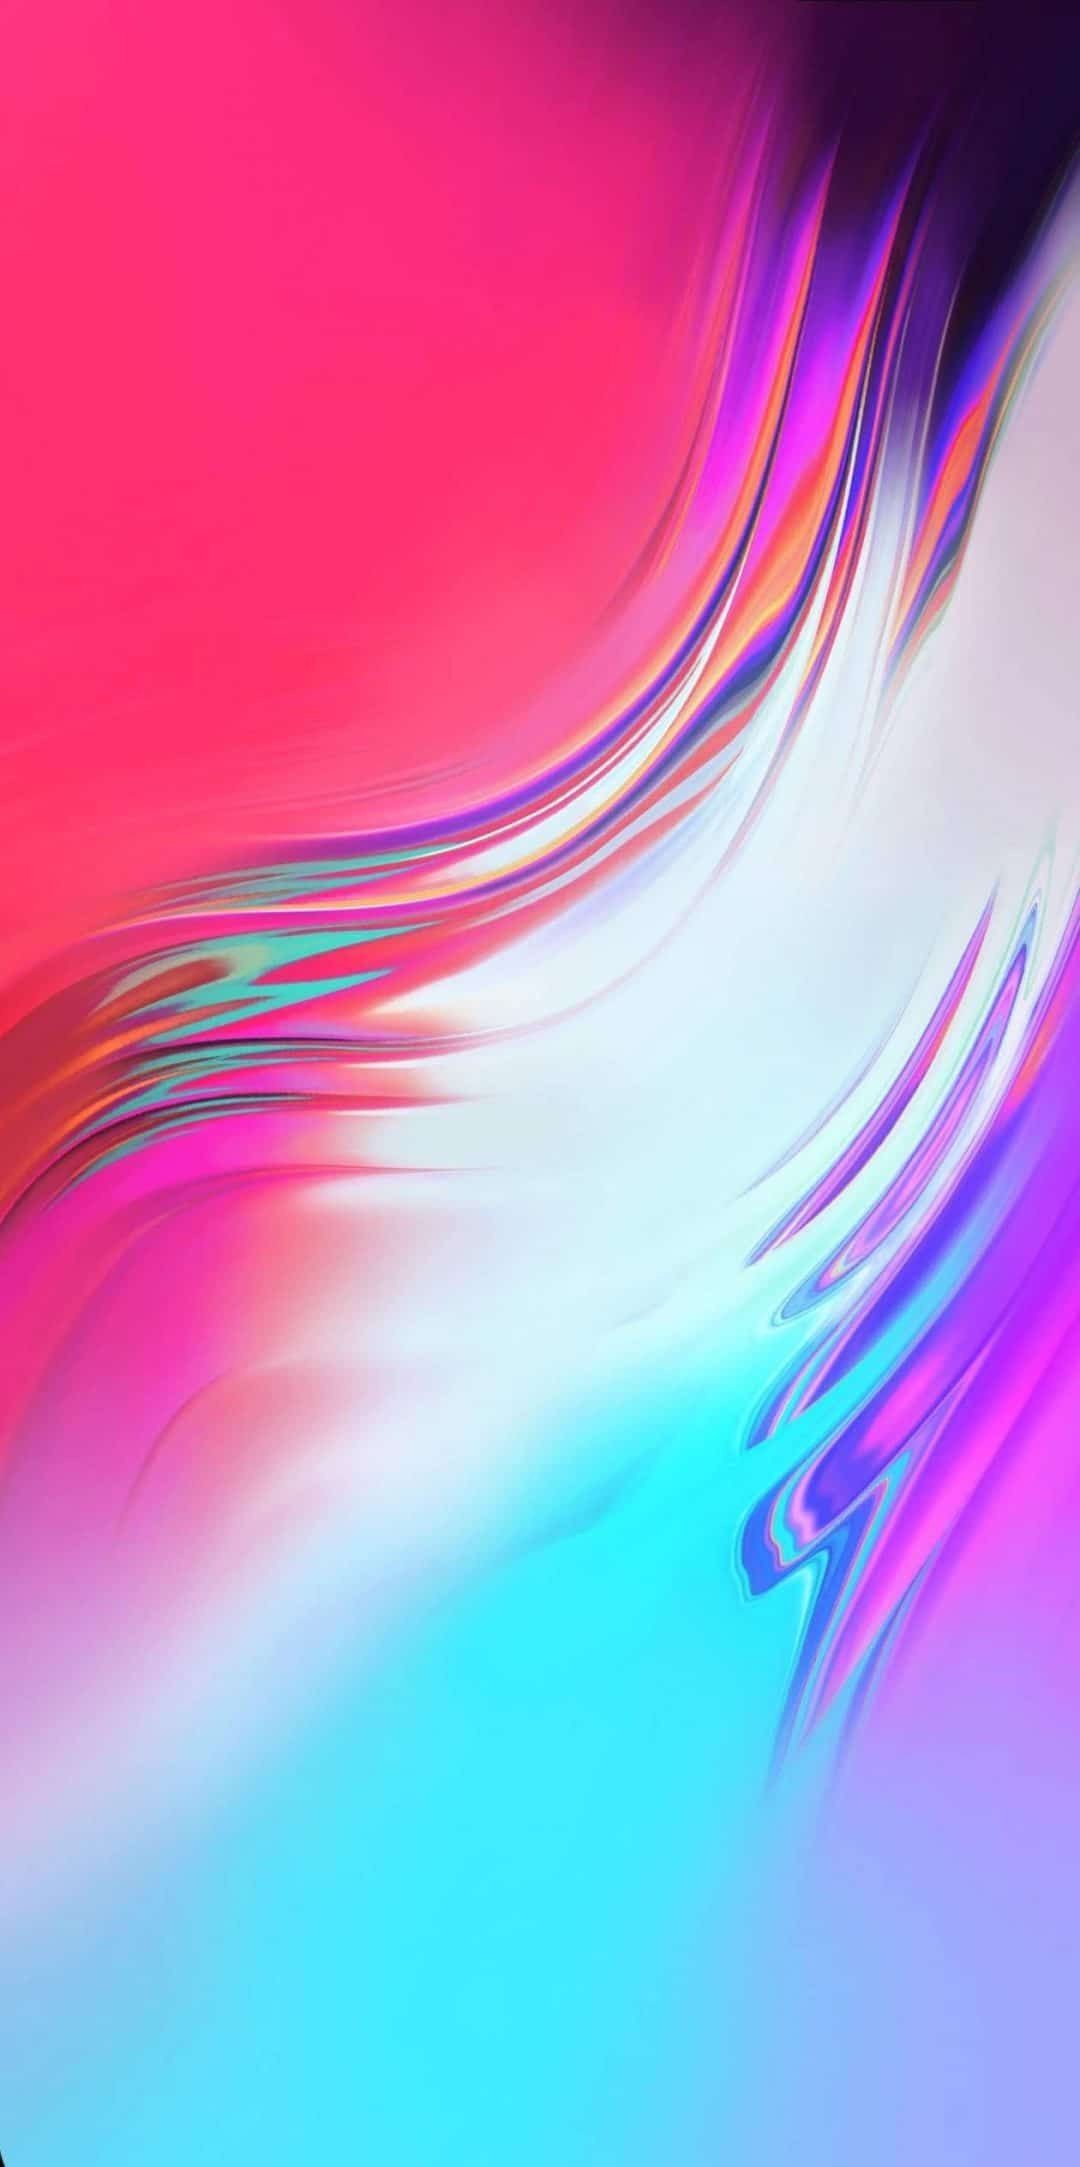 Cool Samsung Wallpapers